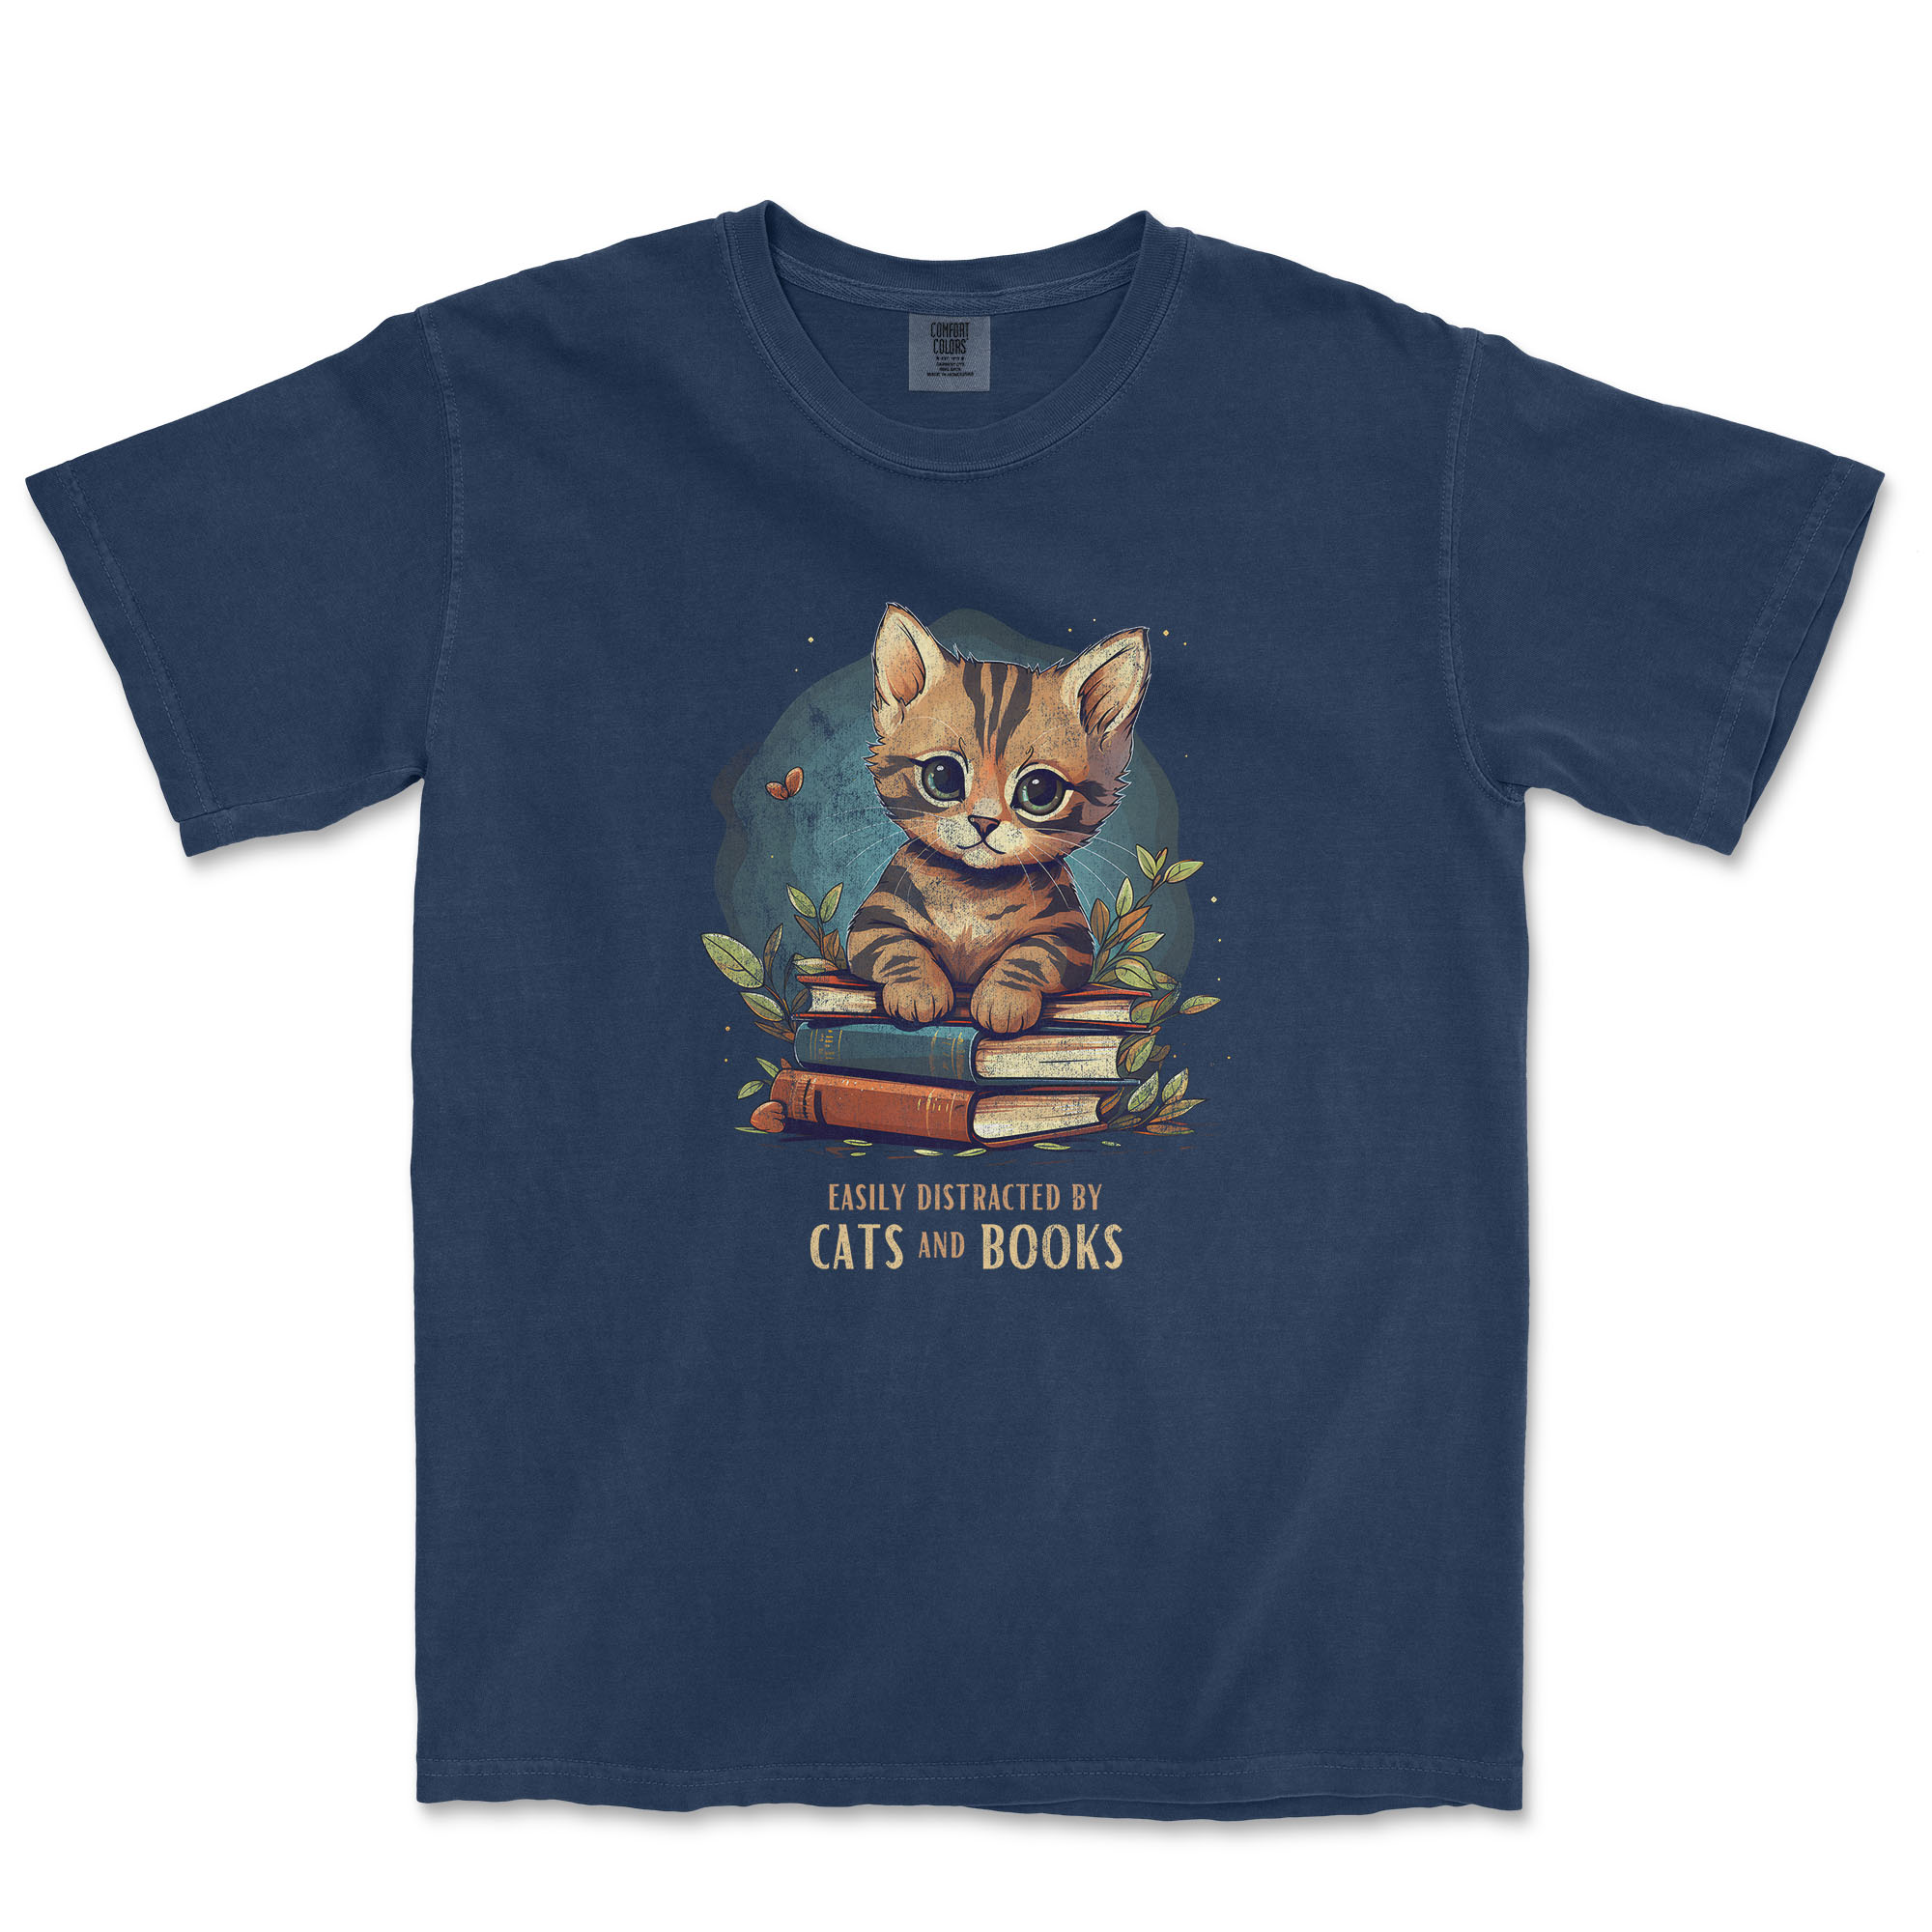 easily distracted by cats and books t-shirt